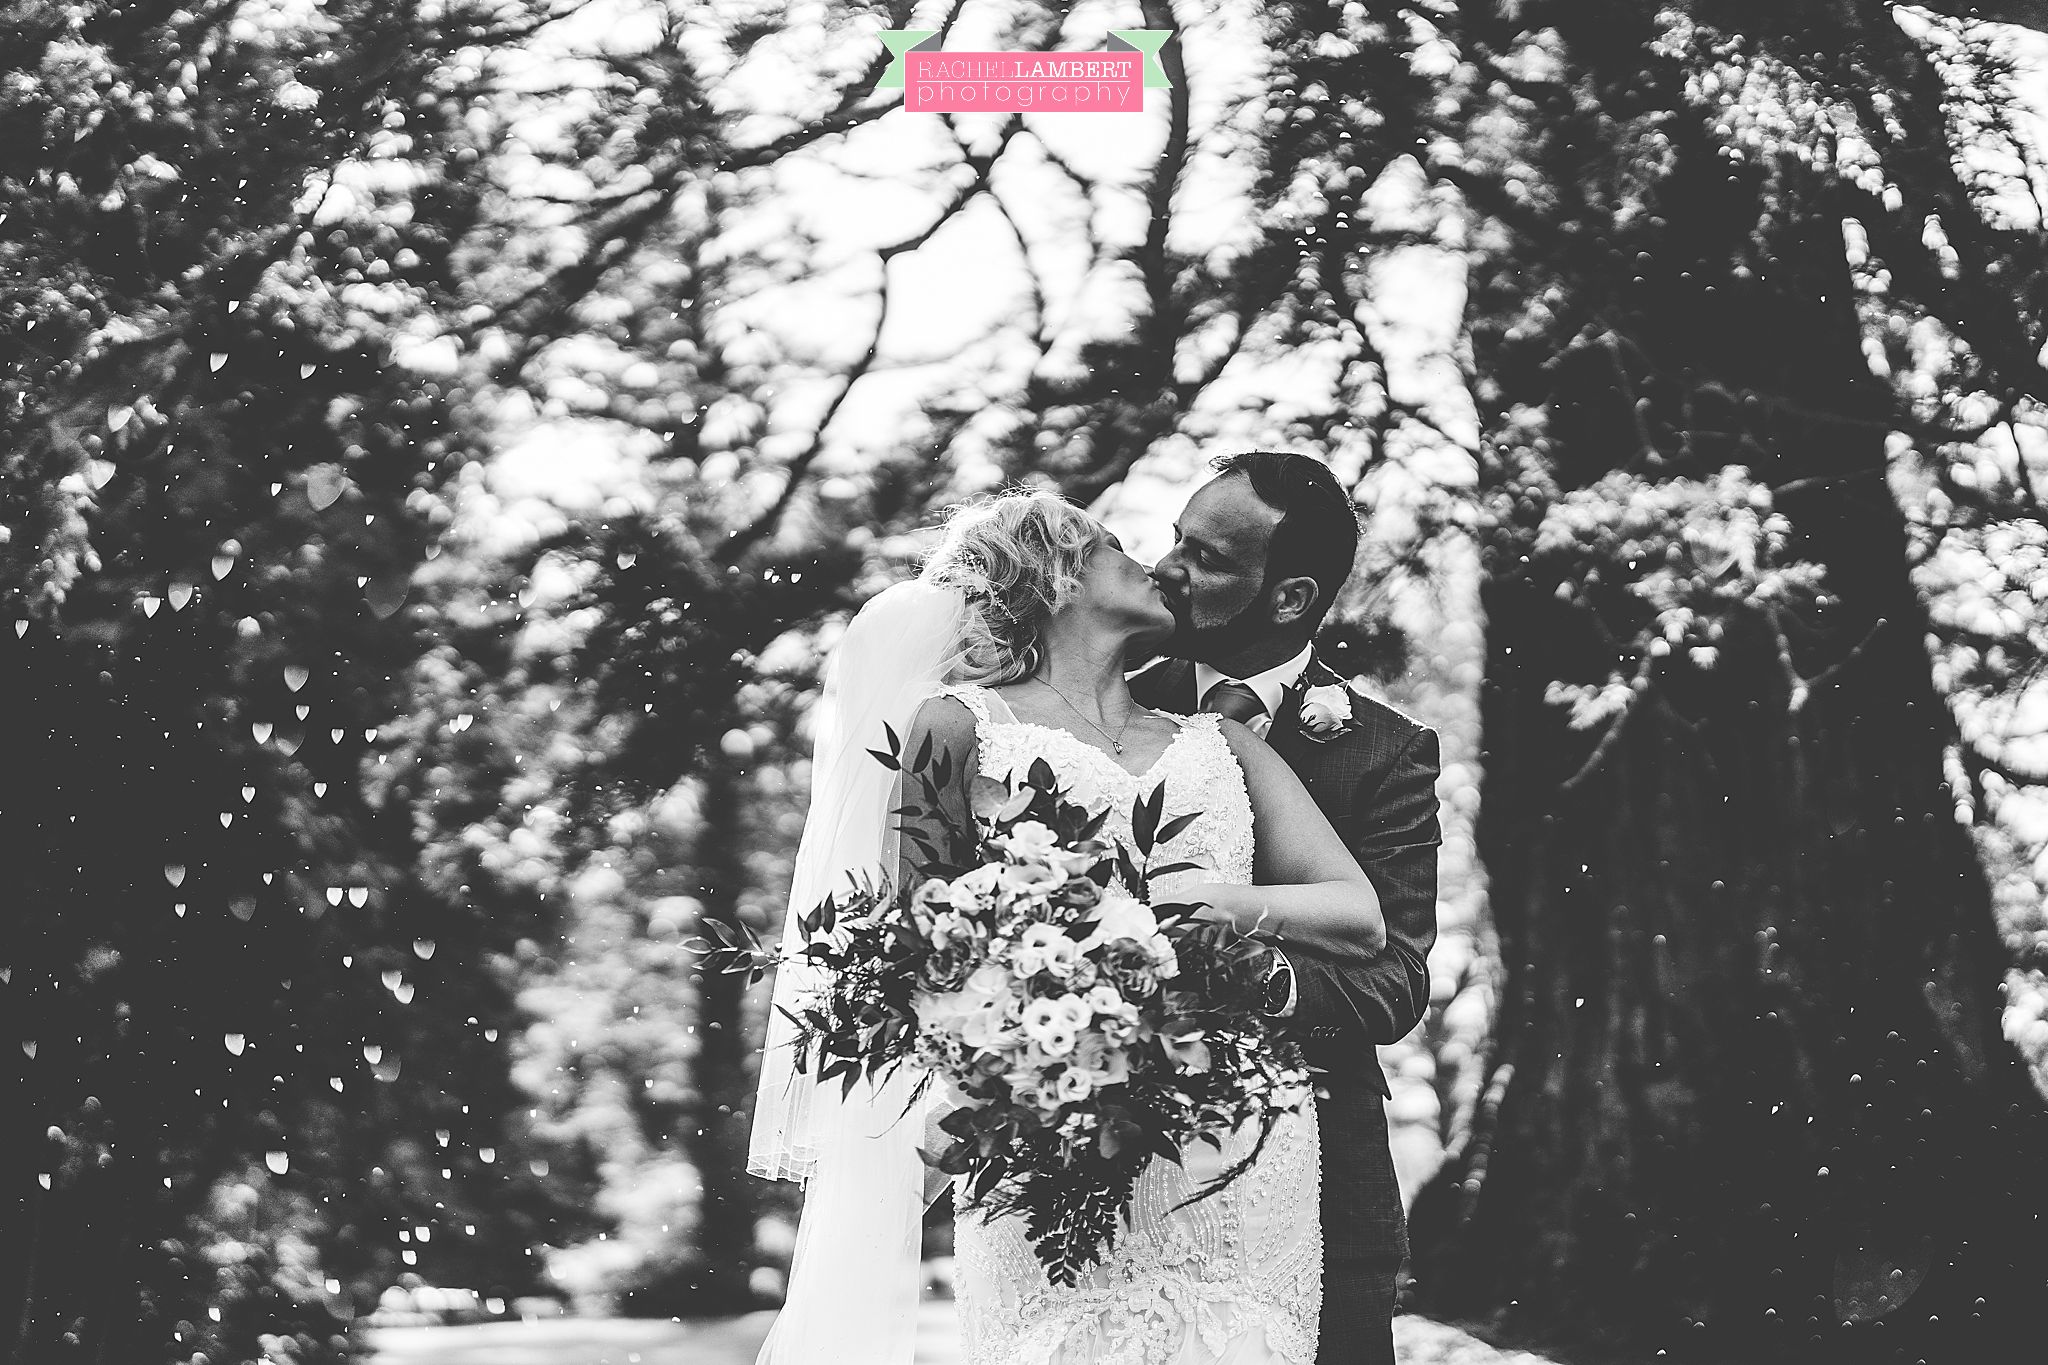 Wedding Photographer Cardiff South Wales Hensol Castle